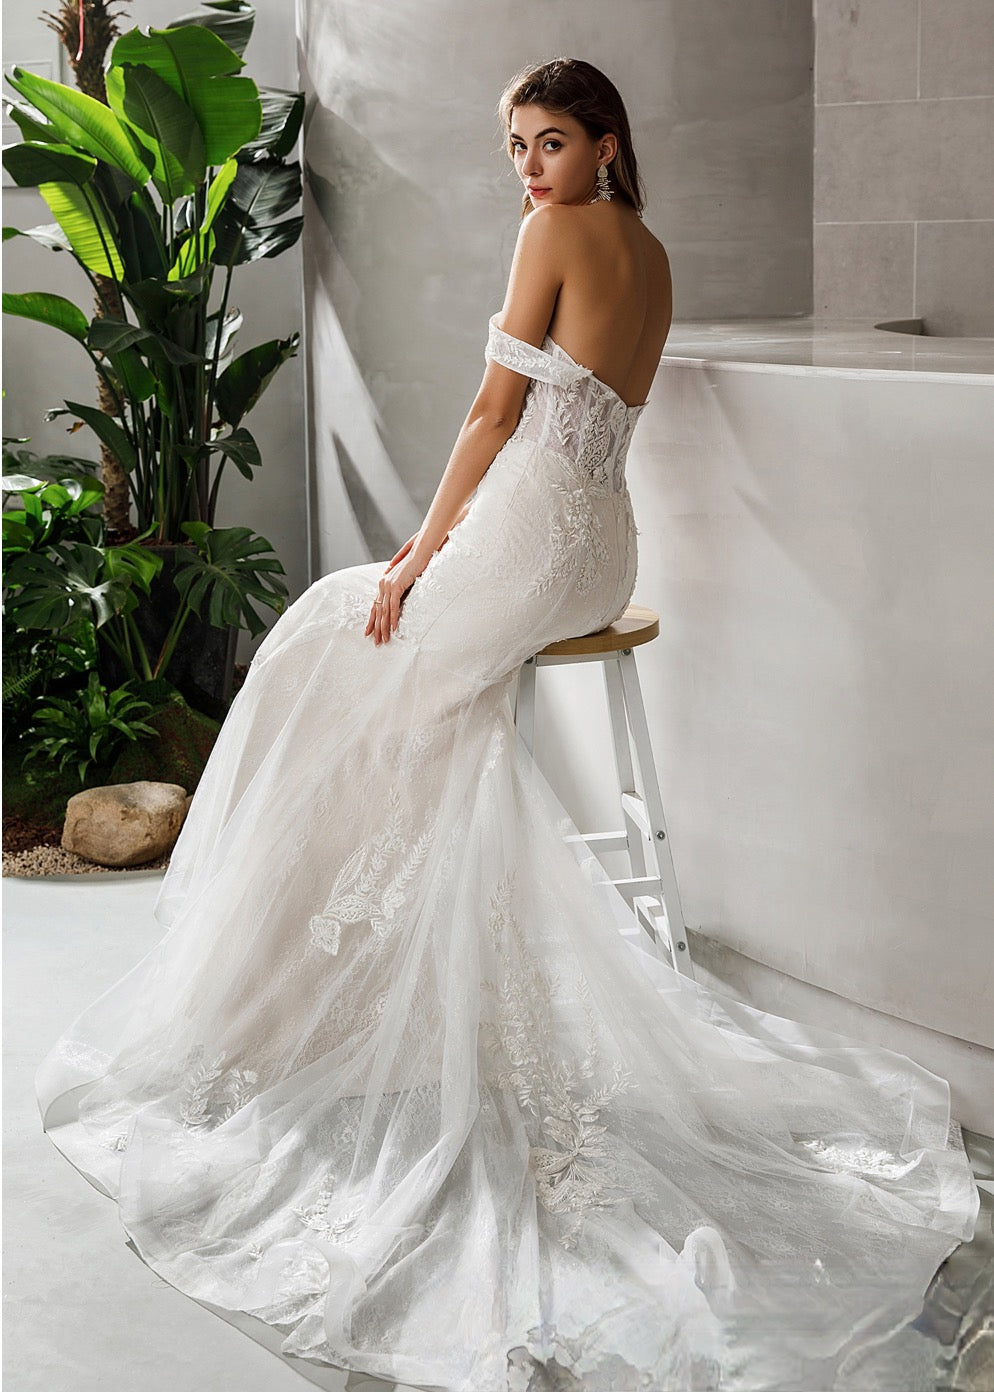 Romantic Sweetheart Neckline Bridal Gown With Illusion Bodice